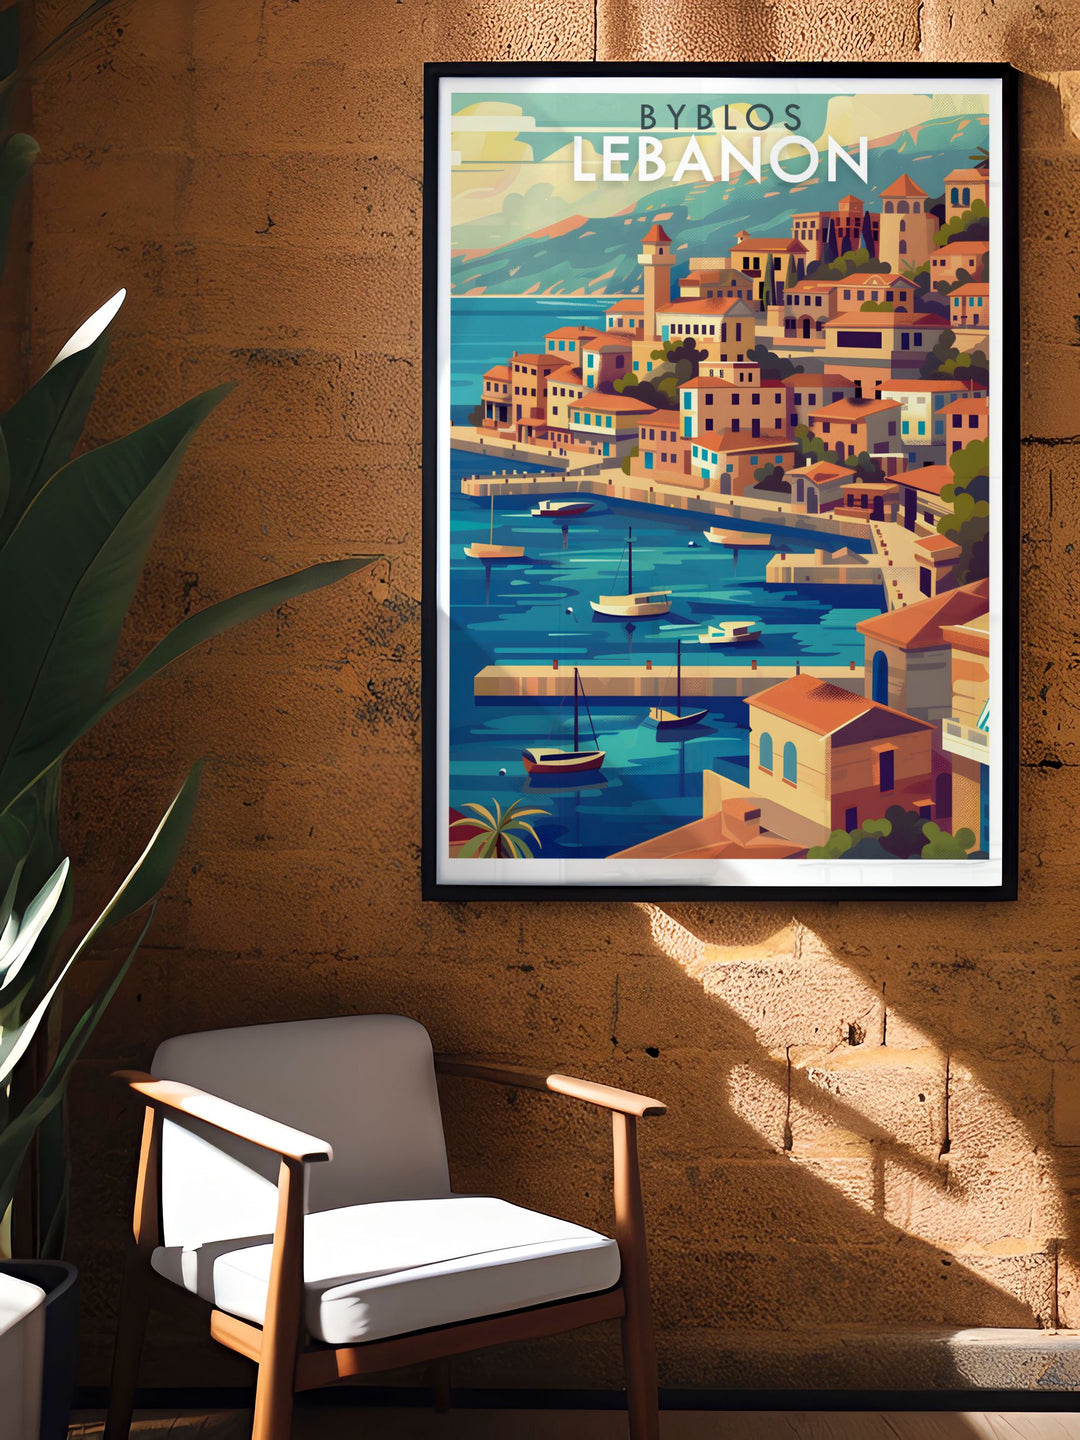 Lebanon Photography featuring stunning landscapes and vibrant culture of Beirut along with Byblos artwork depicting ancient ruins and coastal beauty perfect for birthday gifts and home decor